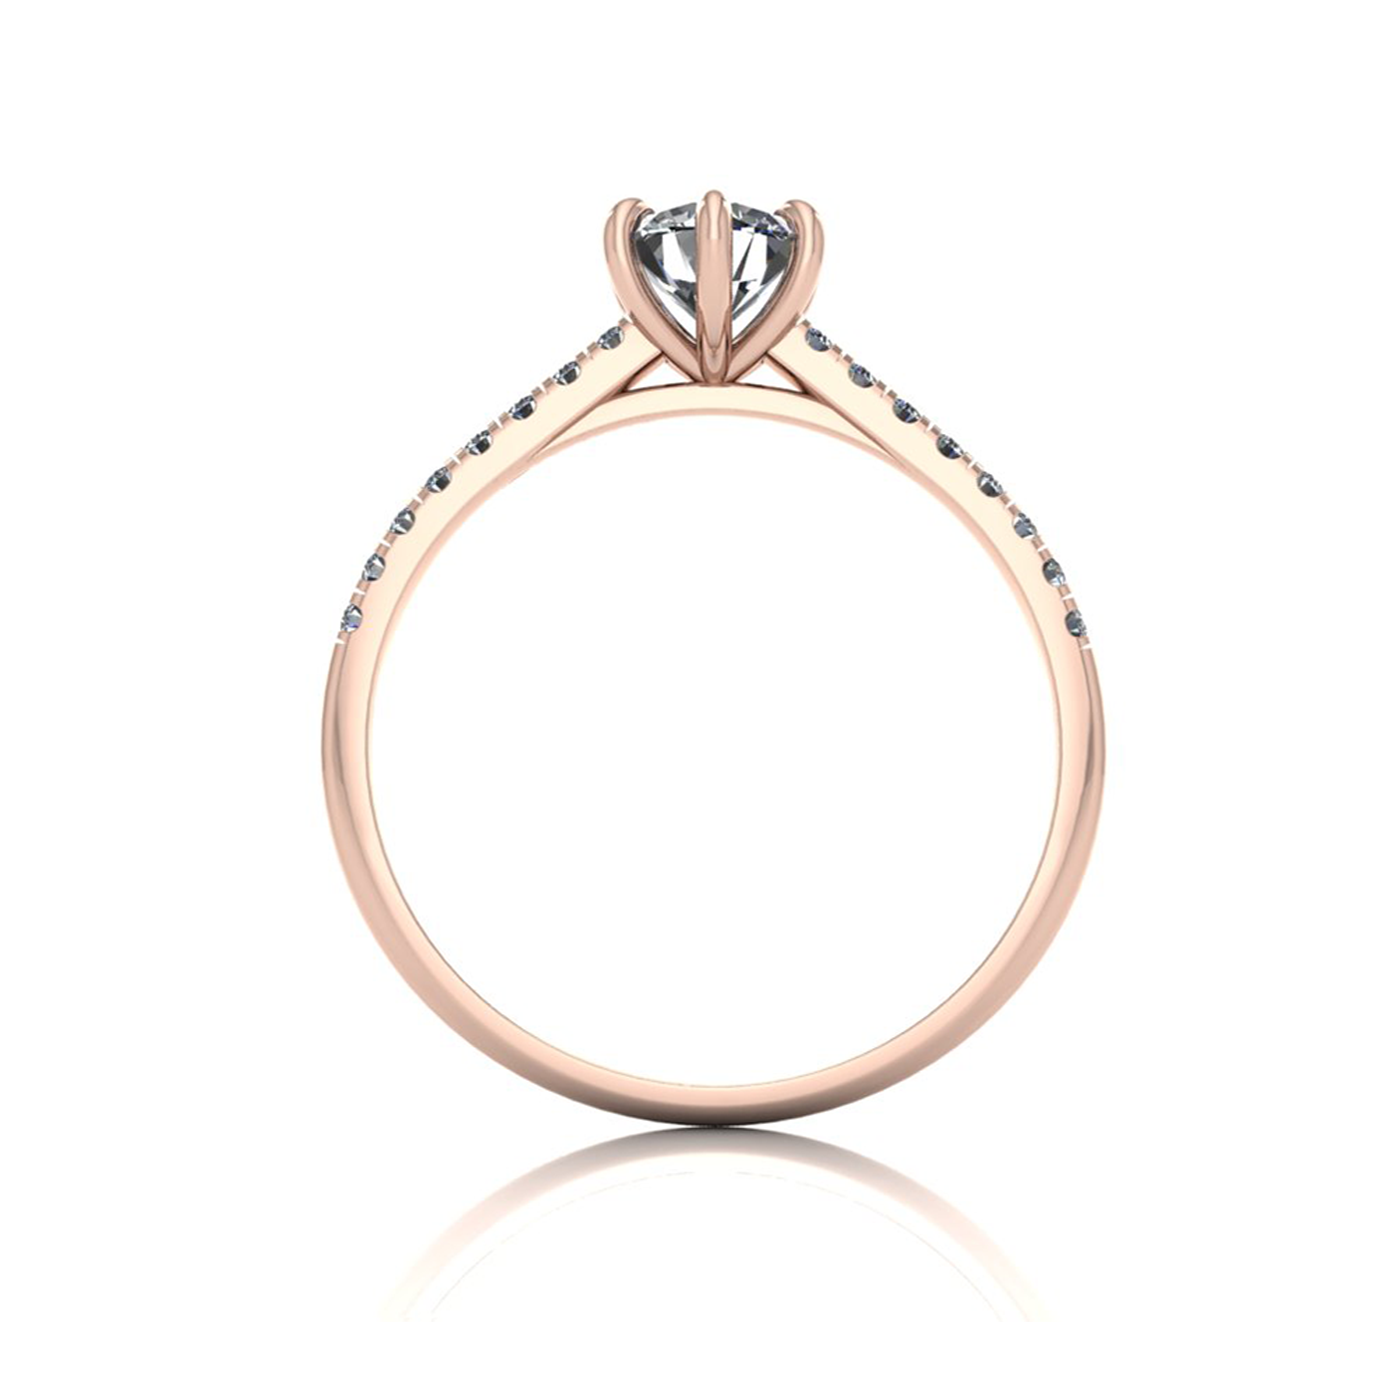 18k rose gold 0,50 ct 6 prongs round cut diamond engagement ring with whisper thin pavÉ set band